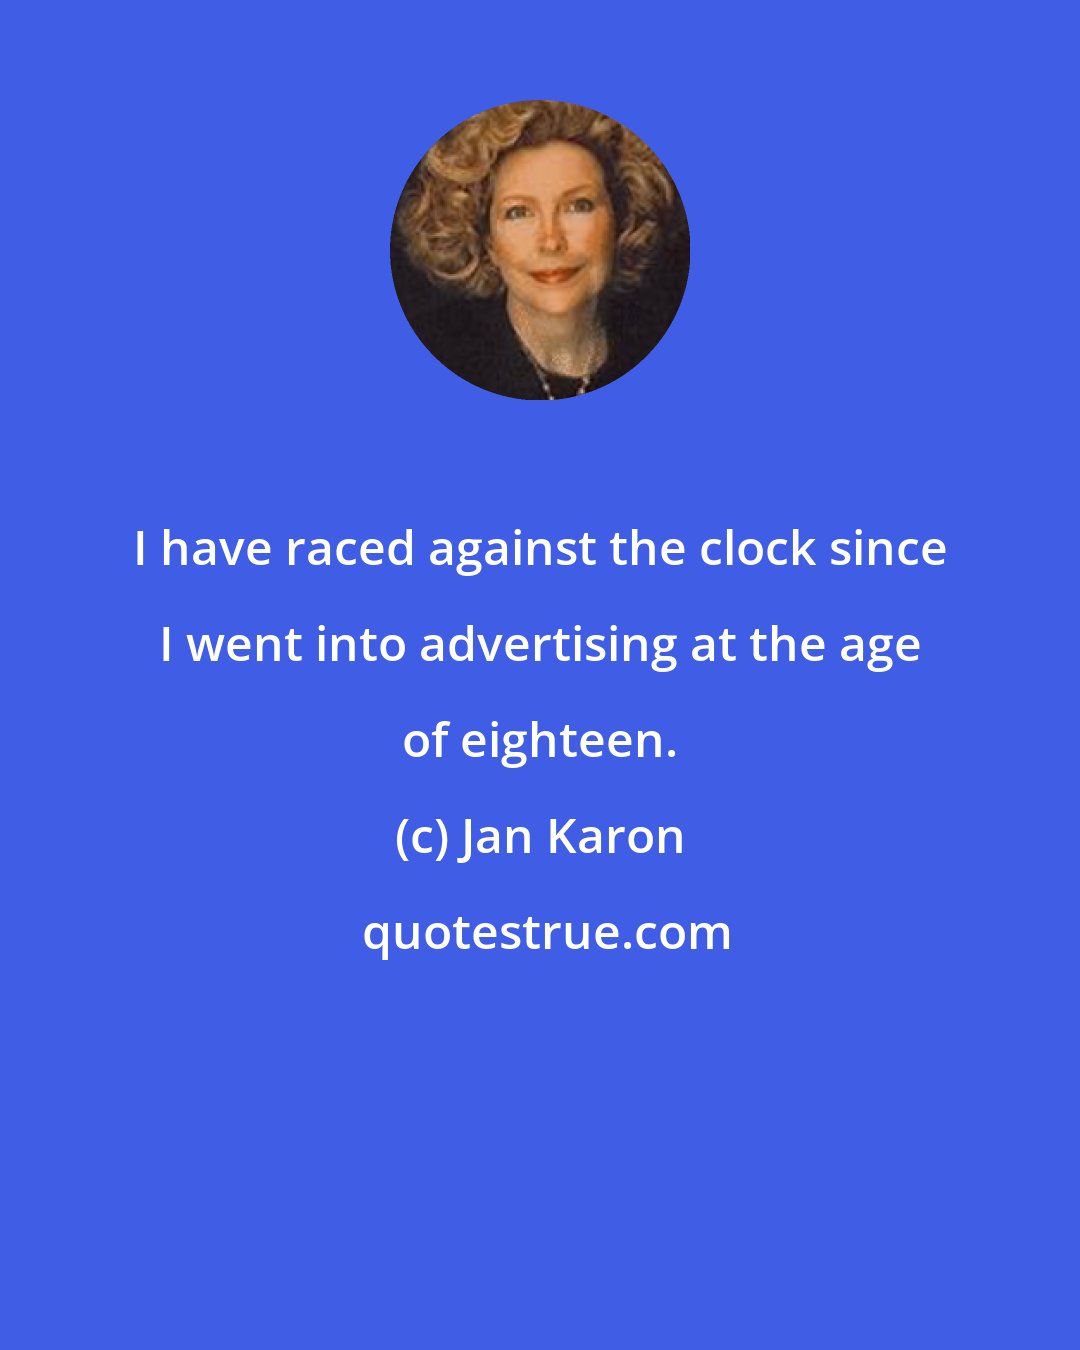 Jan Karon: I have raced against the clock since I went into advertising at the age of eighteen.